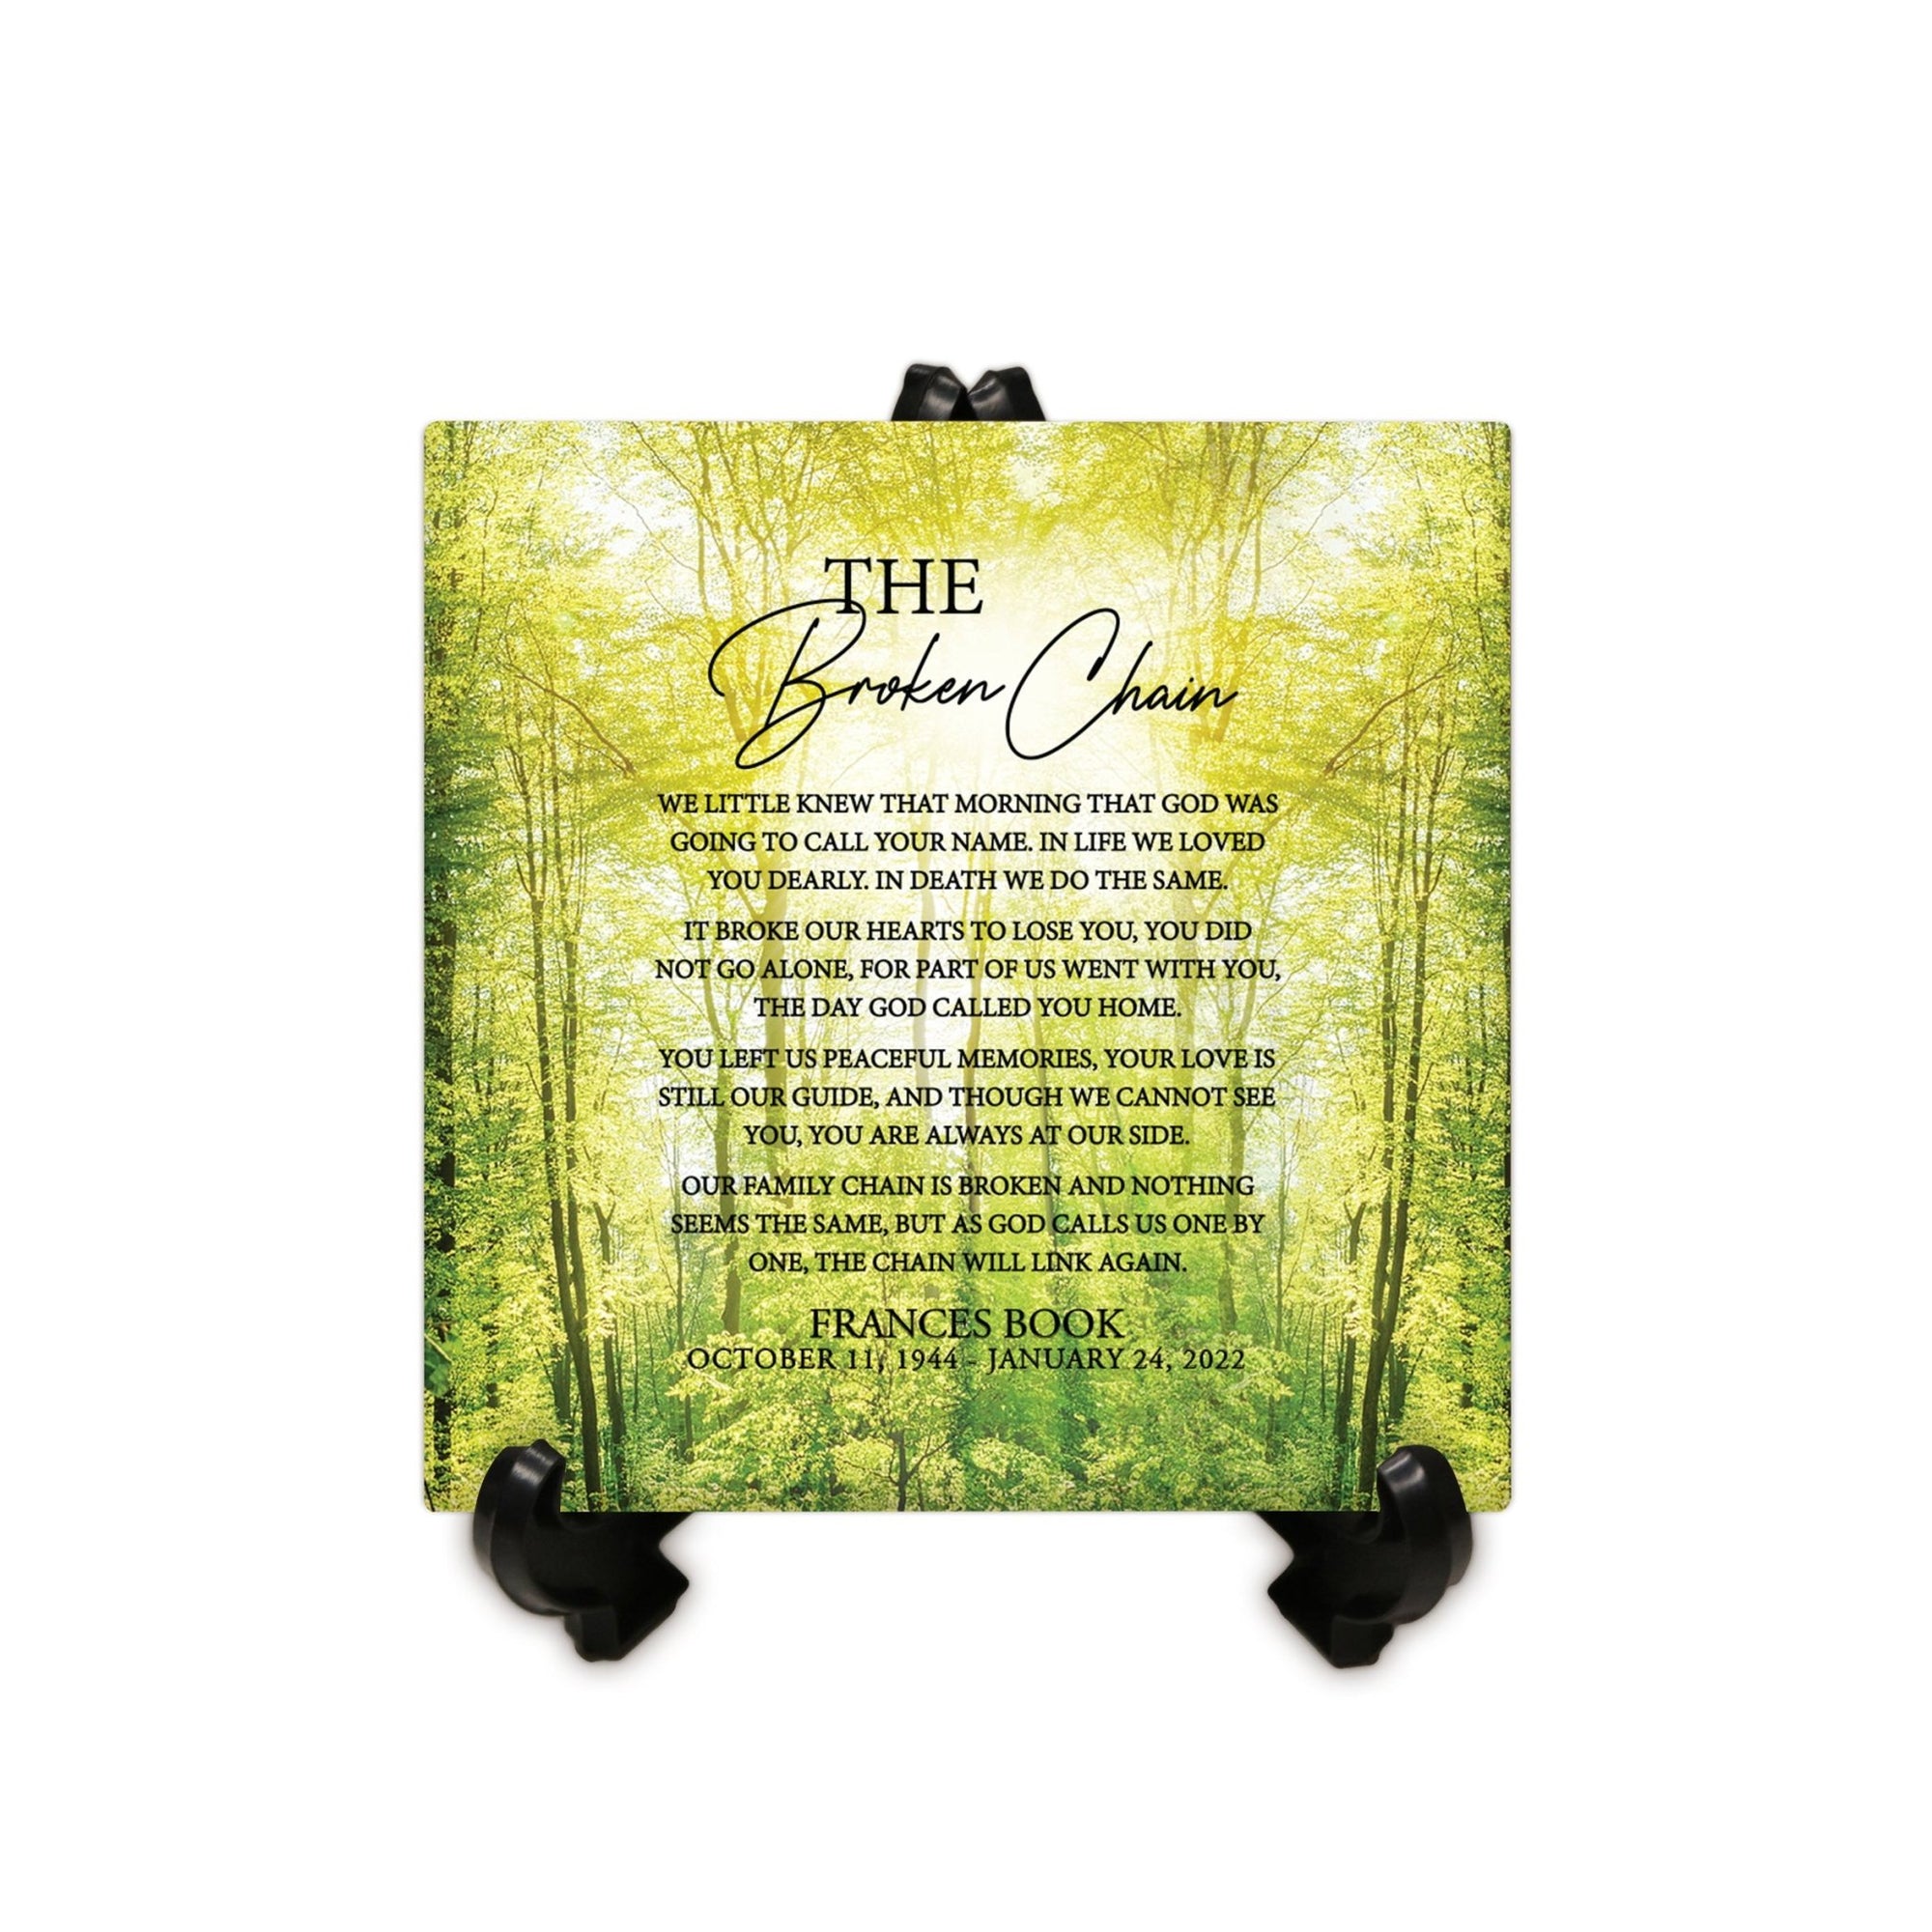 Personalized Memorial Ceramic Trivet with Stand for Home Decor - The Broken Chain - LifeSong Milestones